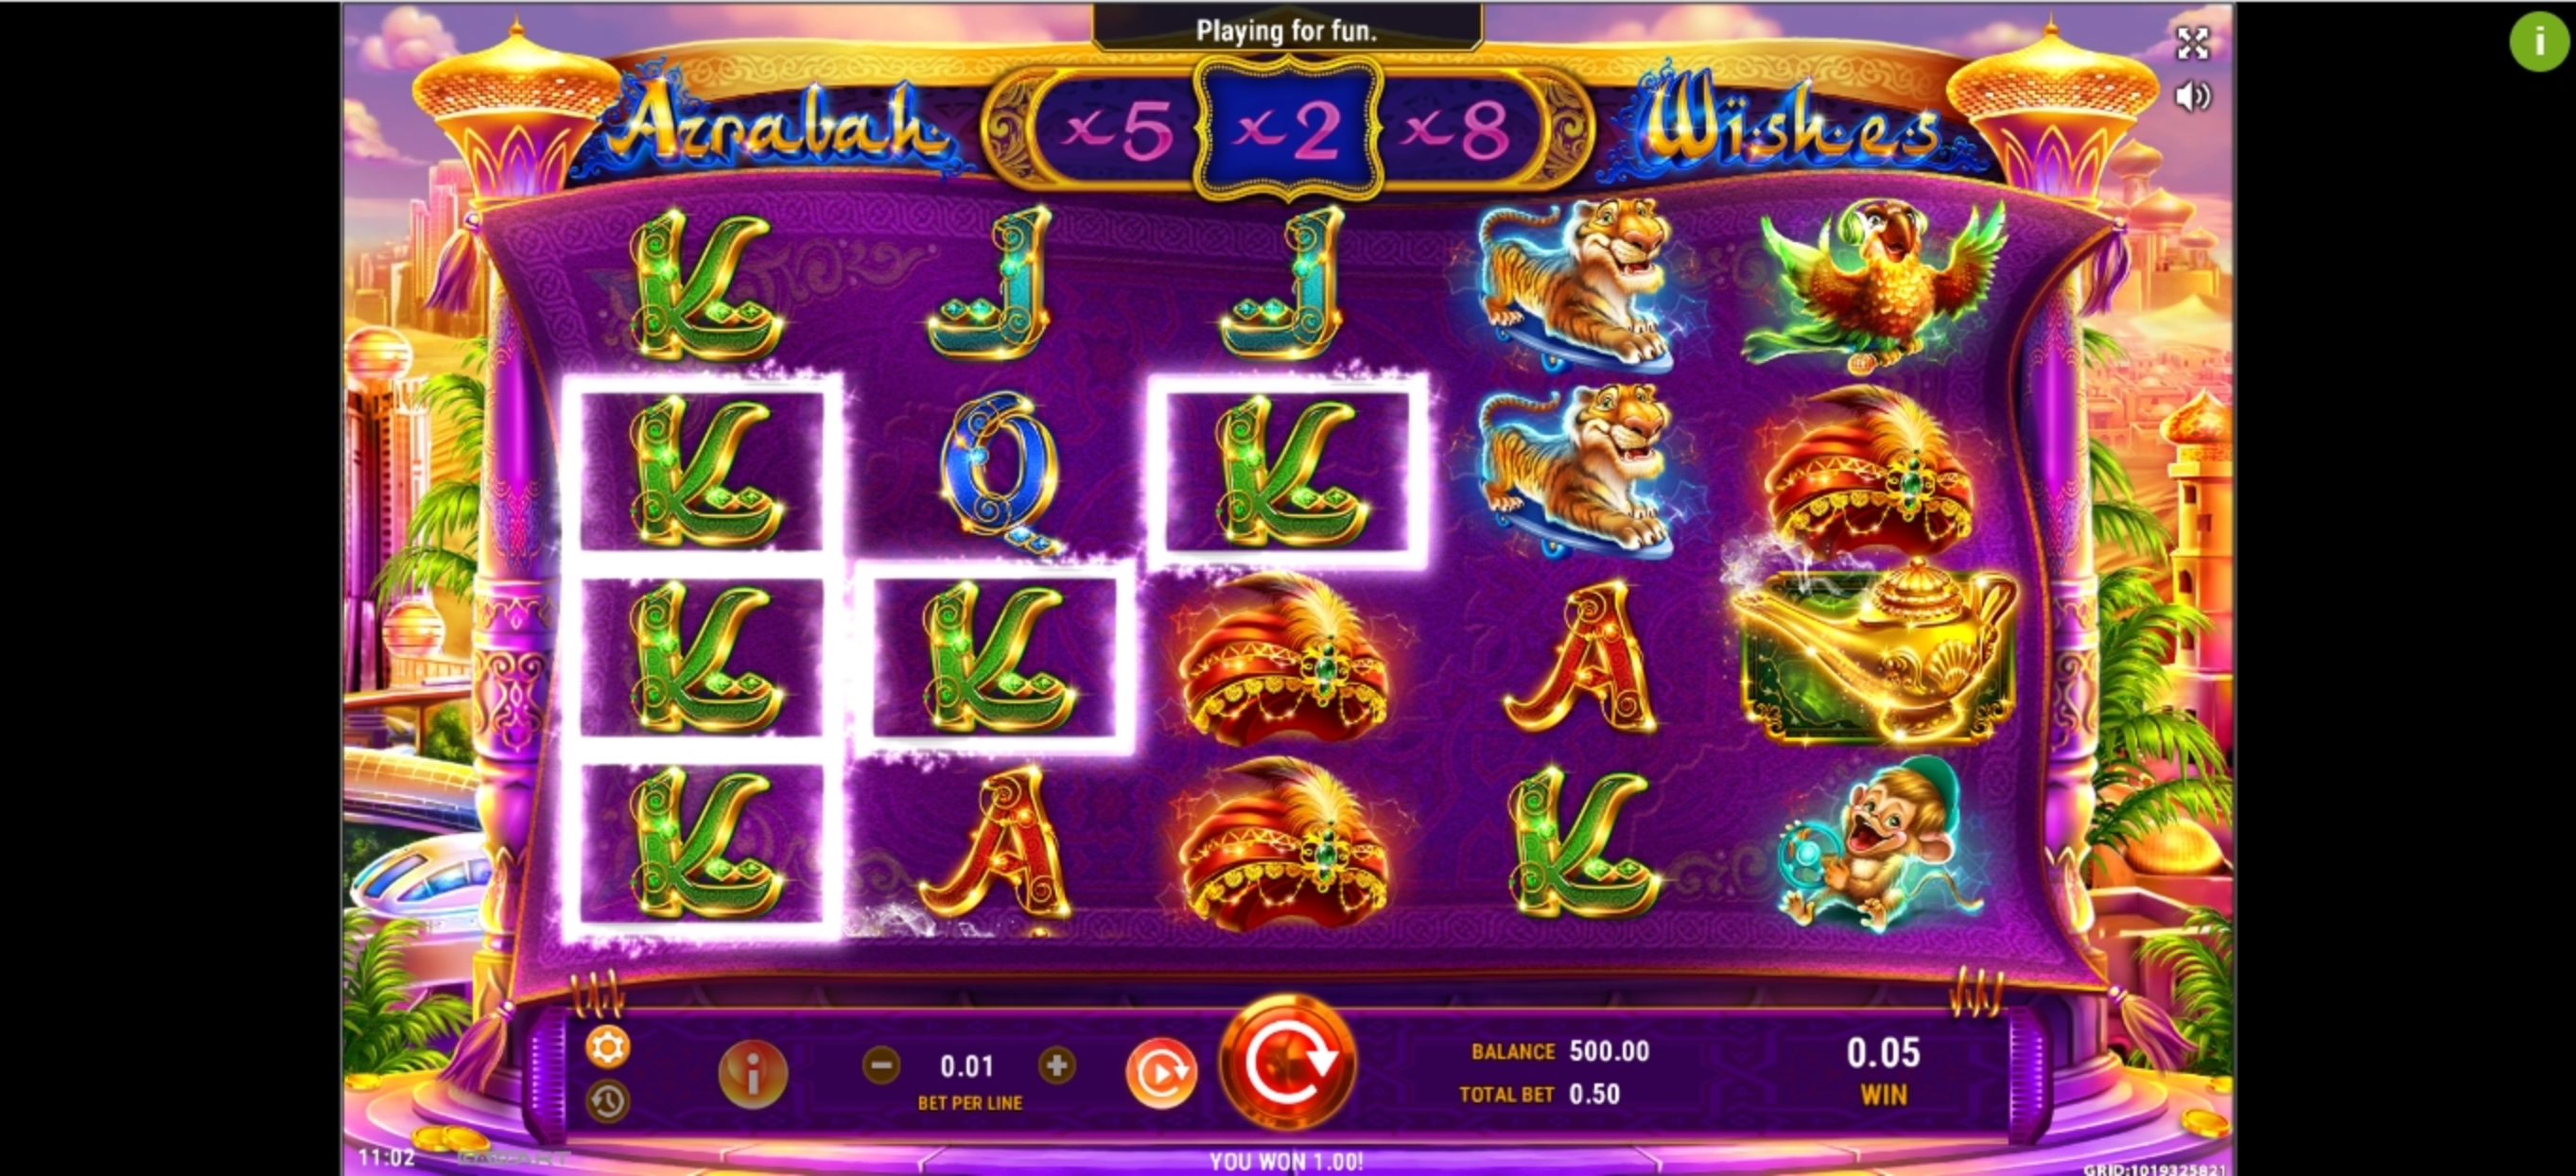 Win Money in Azrabah Wishes Free Slot Game by GameArt